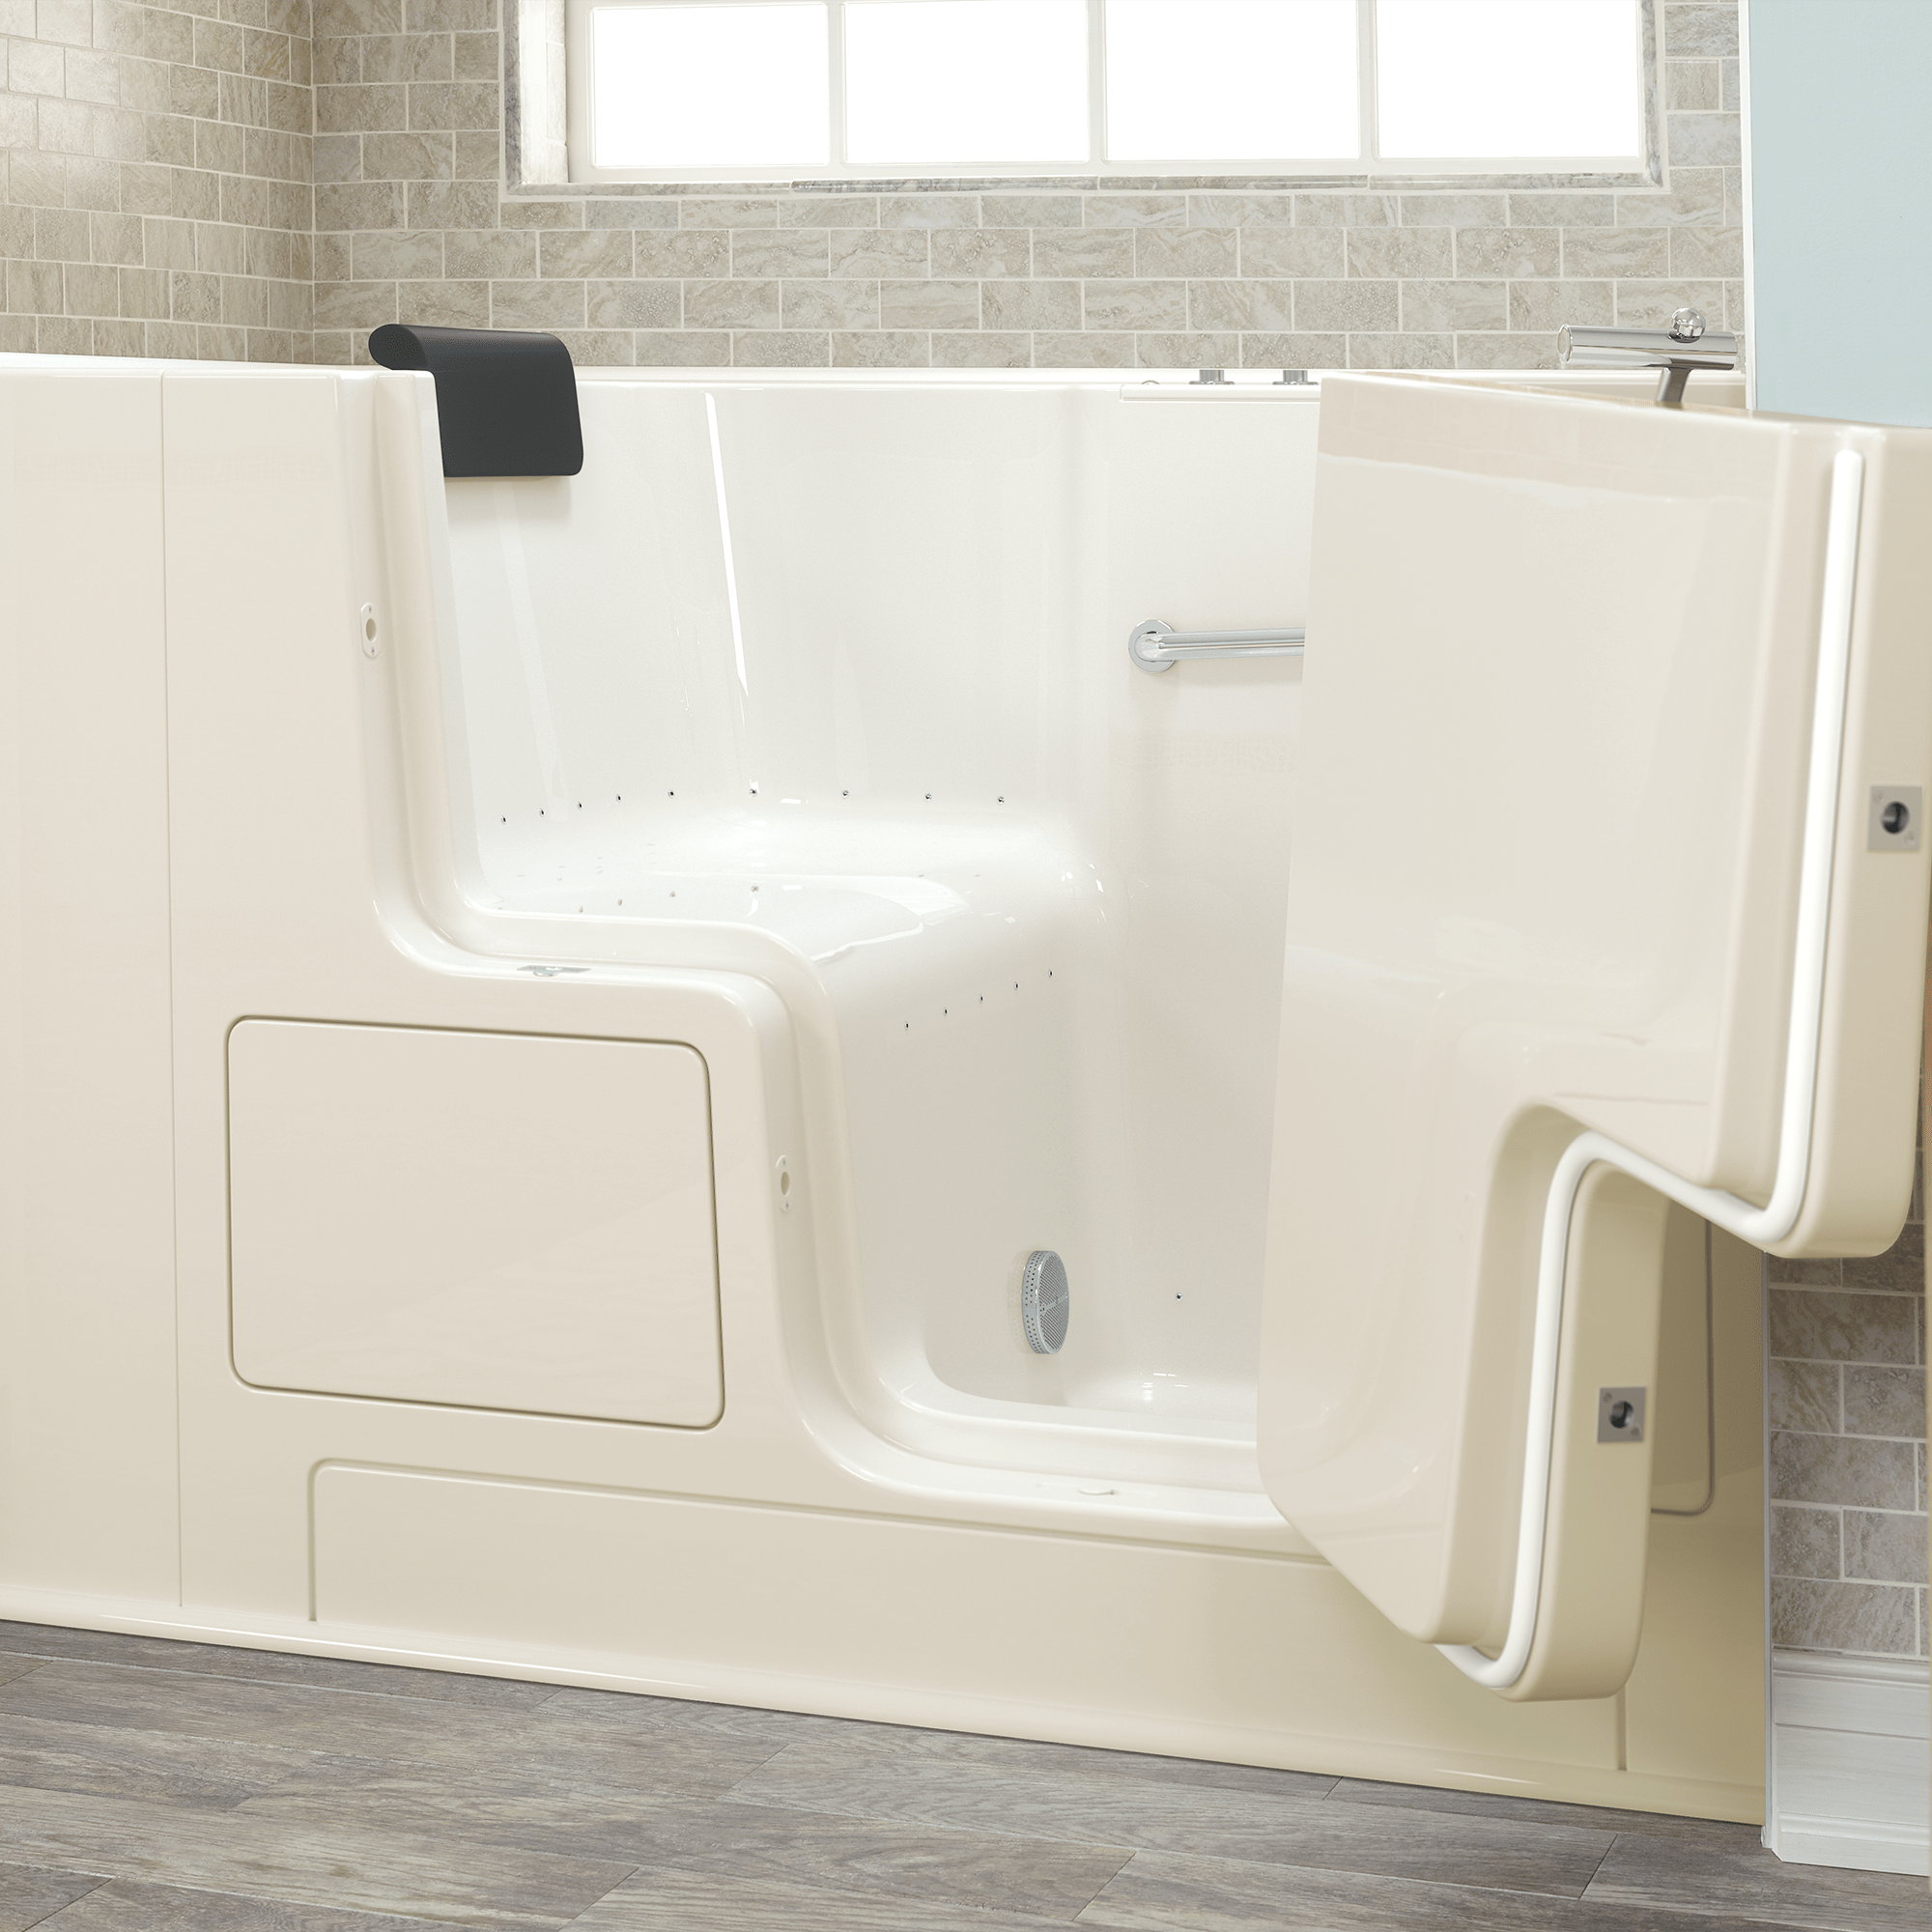 Gelcoat Premium Series 32 x 52 -Inch Walk-in Tub With Air Spa System - Right-Hand Drain